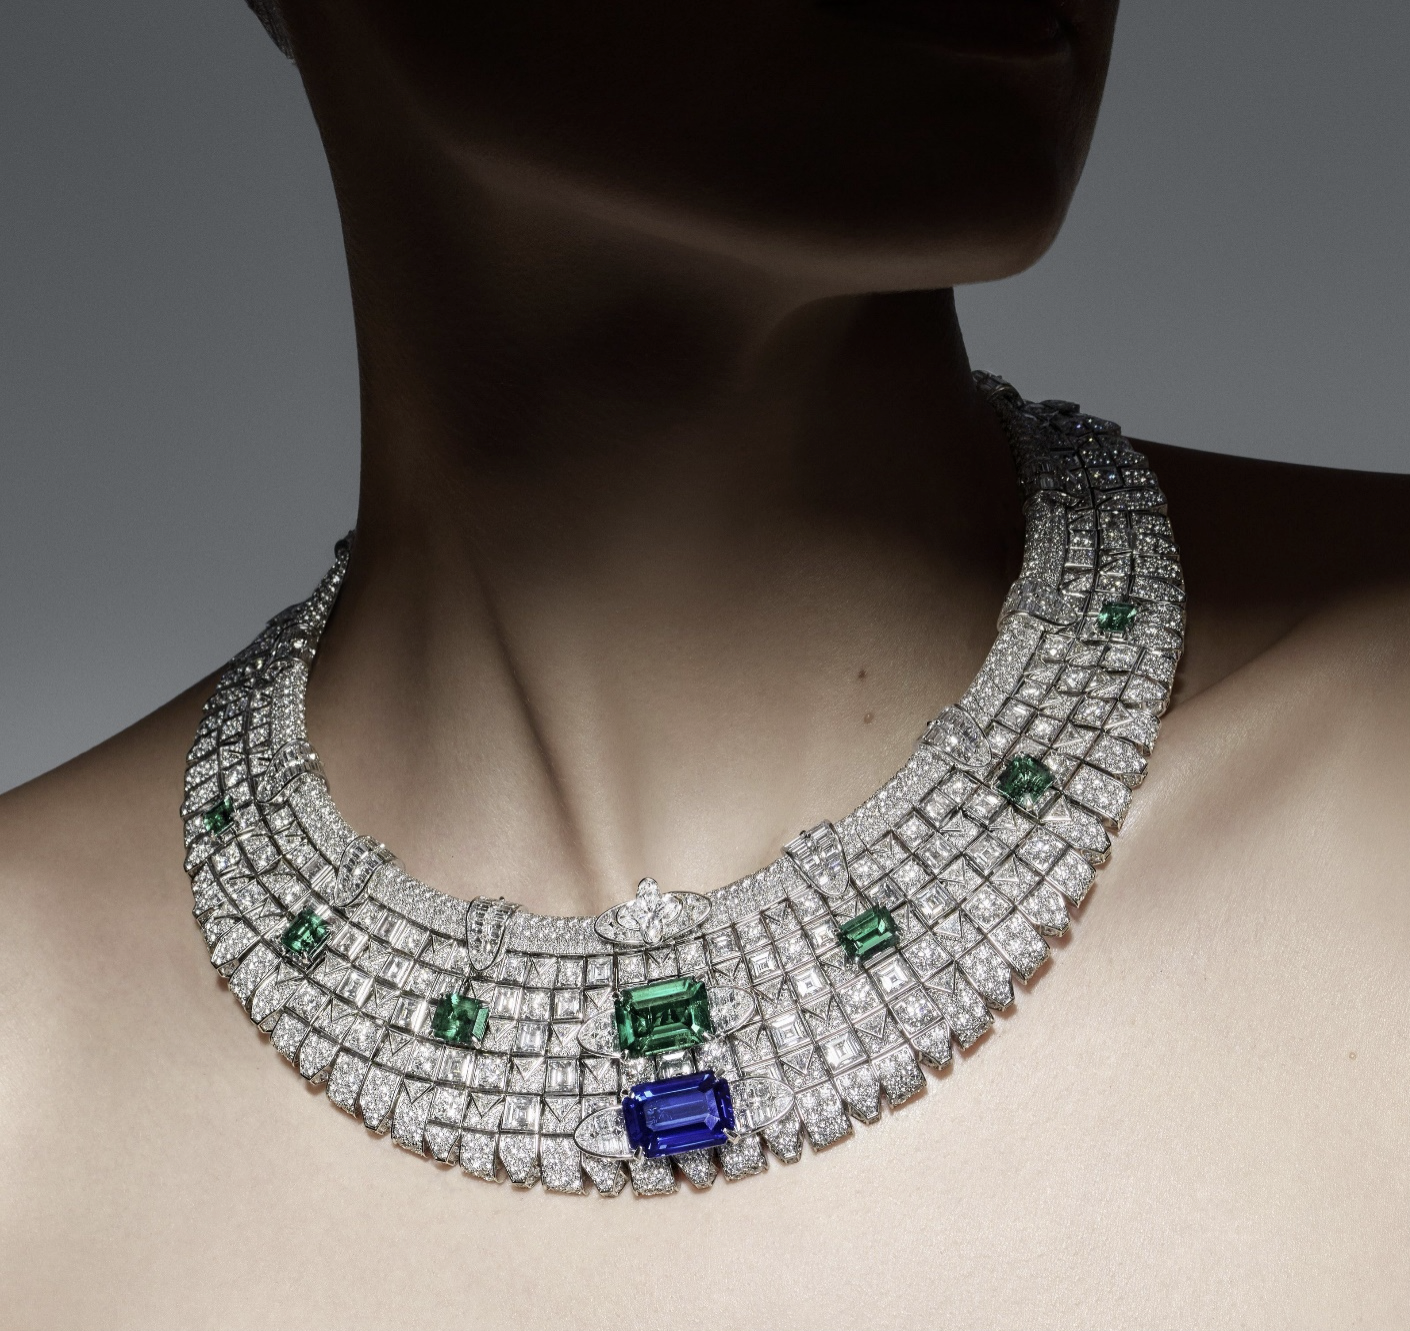 An Edgy Look at Louis Vuitton Spirit High Jewellery Collection